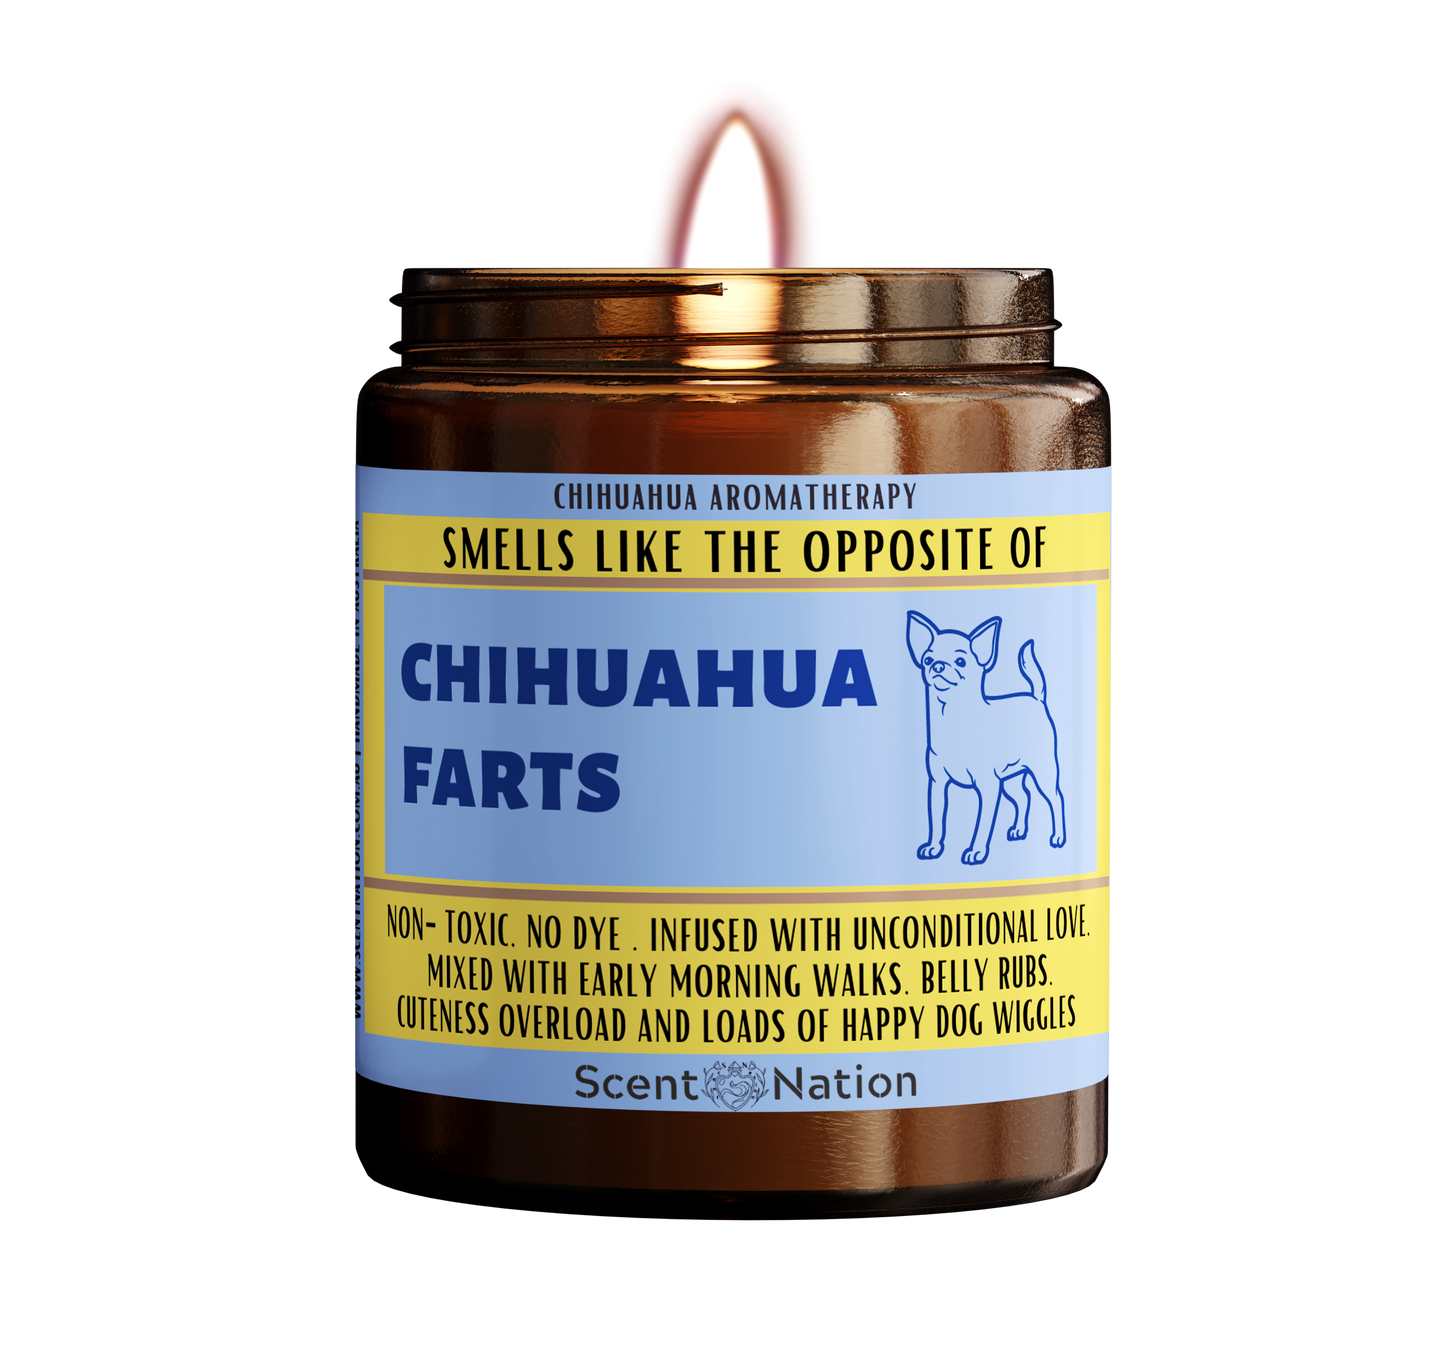 Personalised candle for Chihuahua dog owners - perfect gifts for dog lovers in Australia 